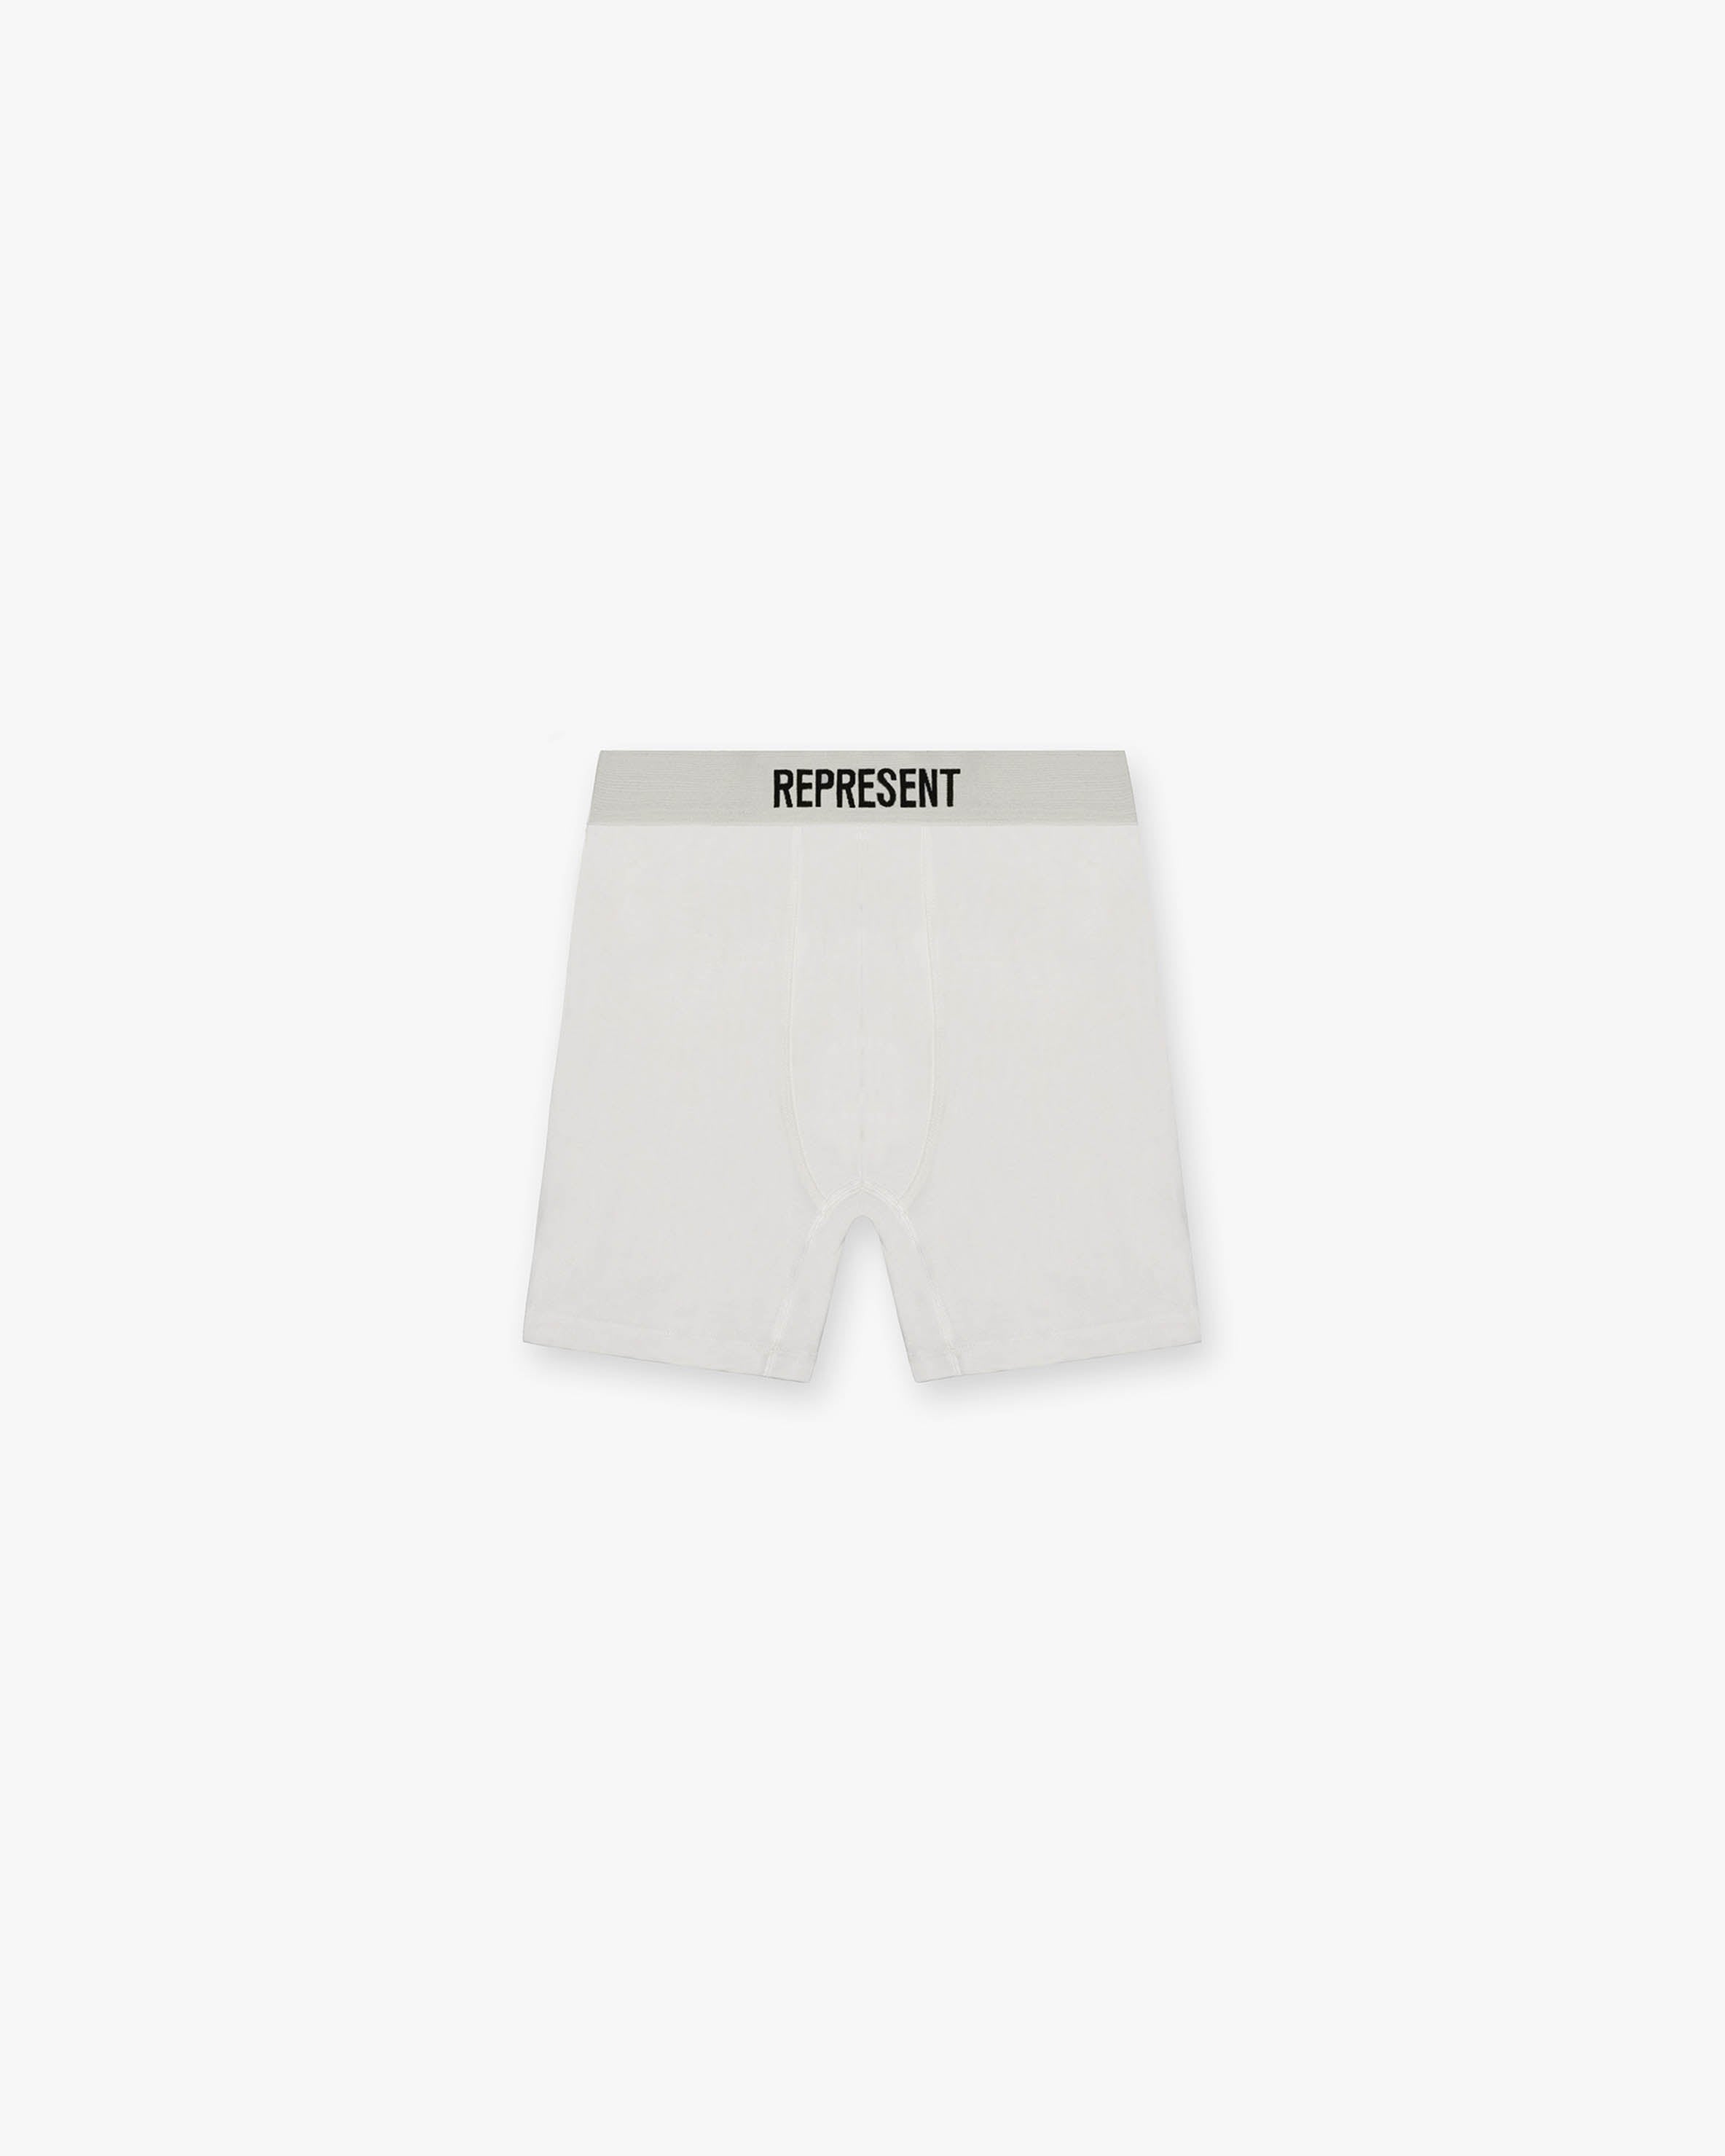 Represent Boxers 2 Pack - Flat White